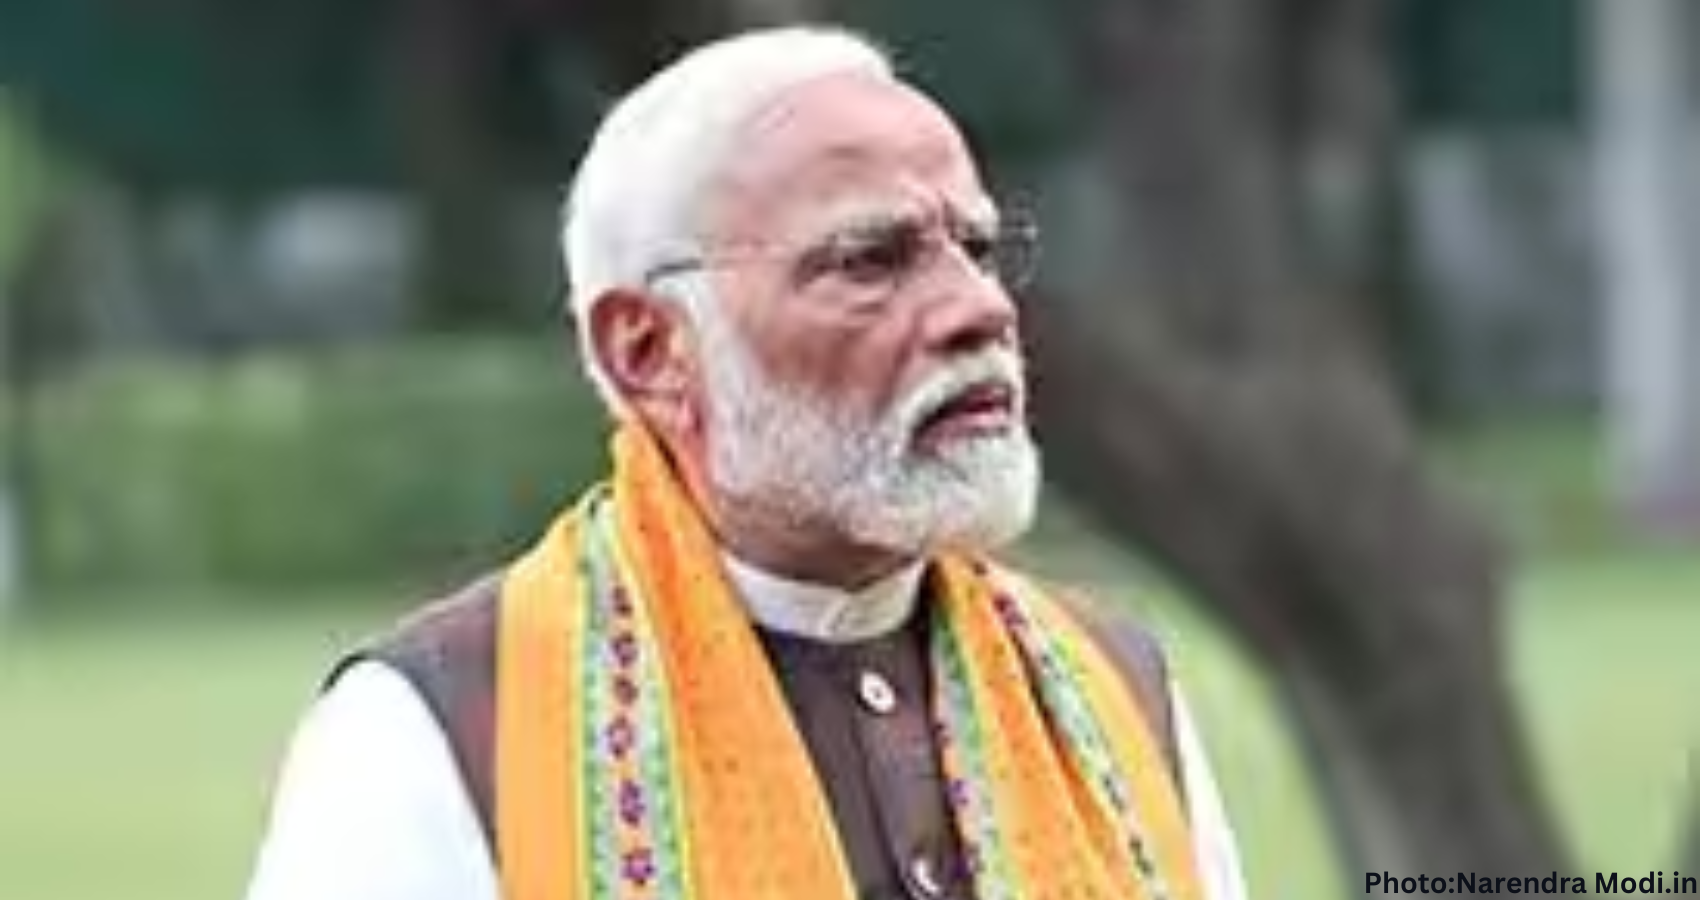 Modi’s Grip Weakens as Indian Billionaires Face Scrutiny: A Tale of Cronyism and Economic Inequality